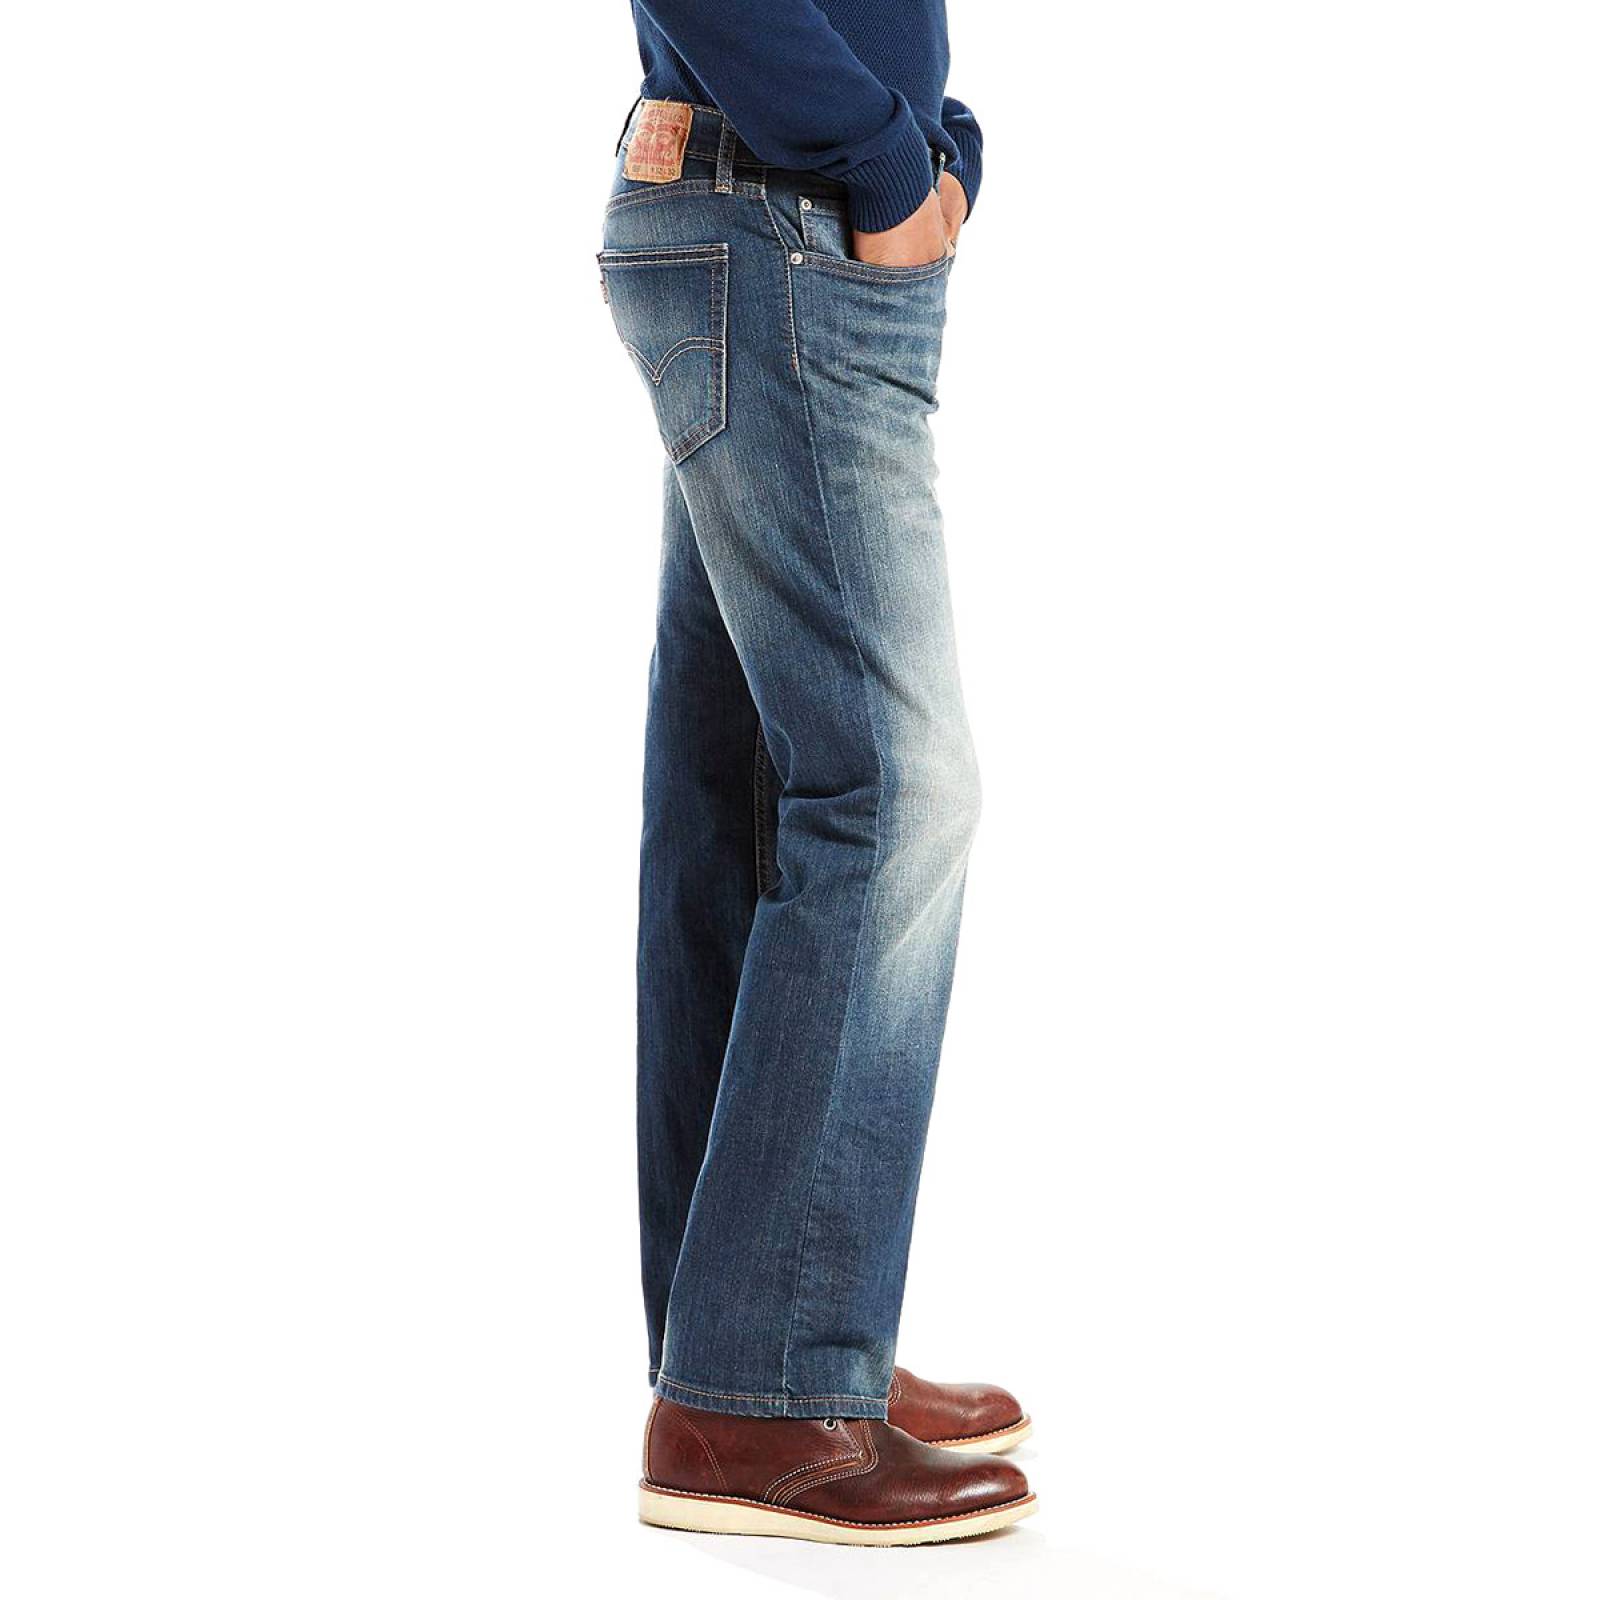 Jeans 559 Relaxed Aight Big & Tall para Caballero